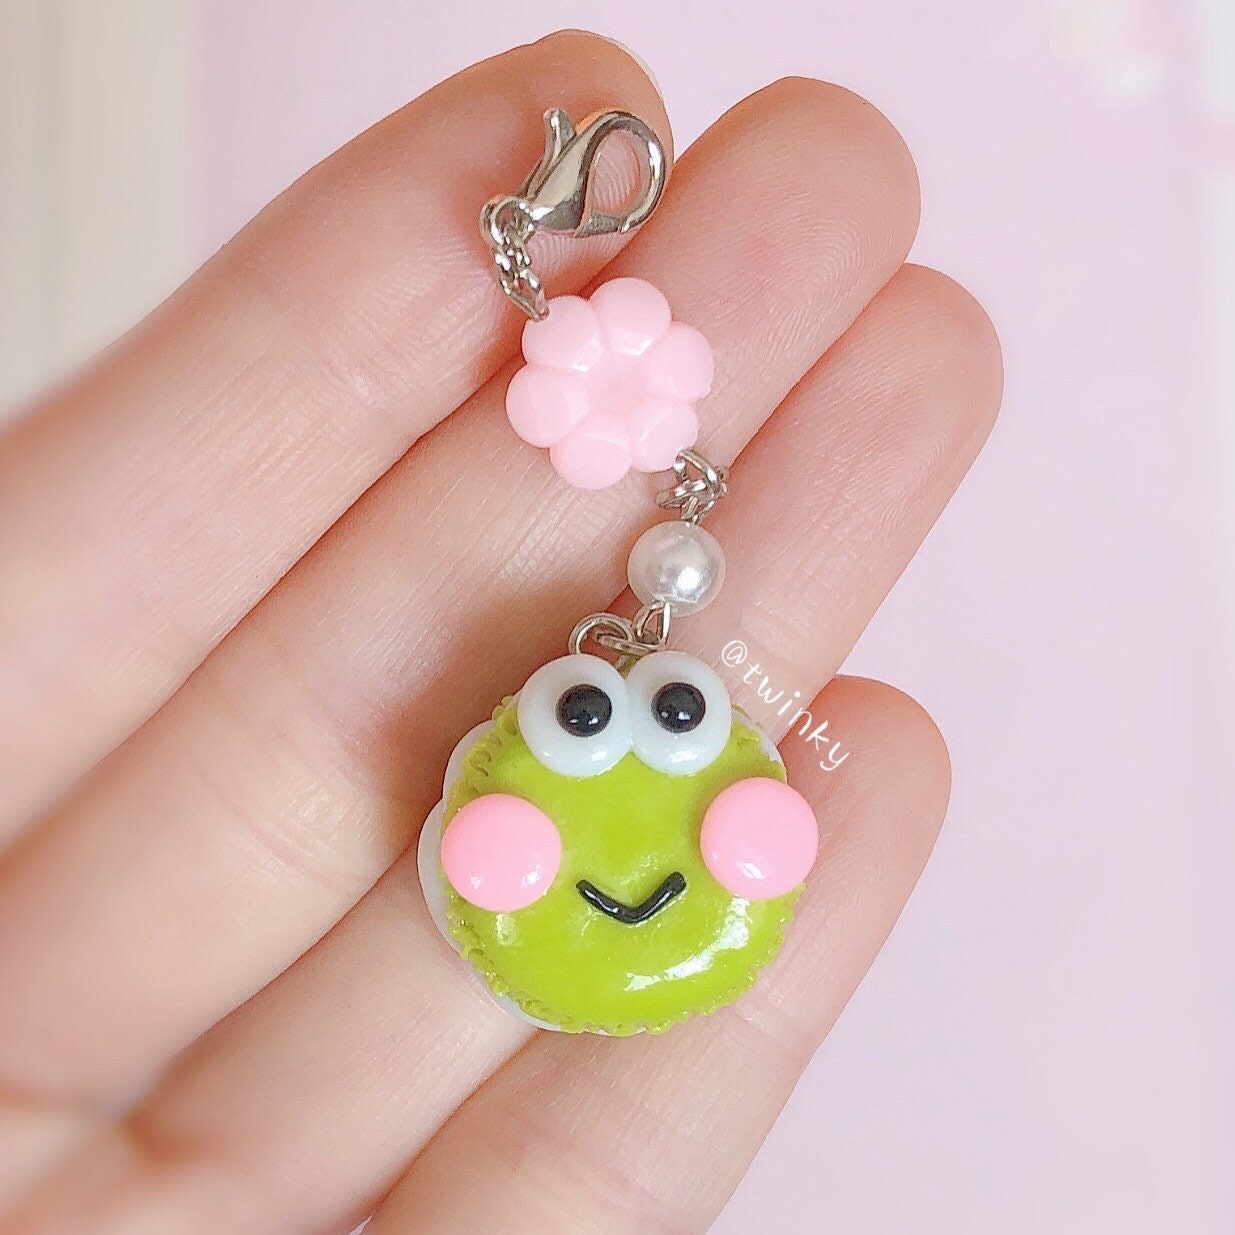 Charms Cute Keroppi Macaron Polymer Clay Charms Planner | Etsy